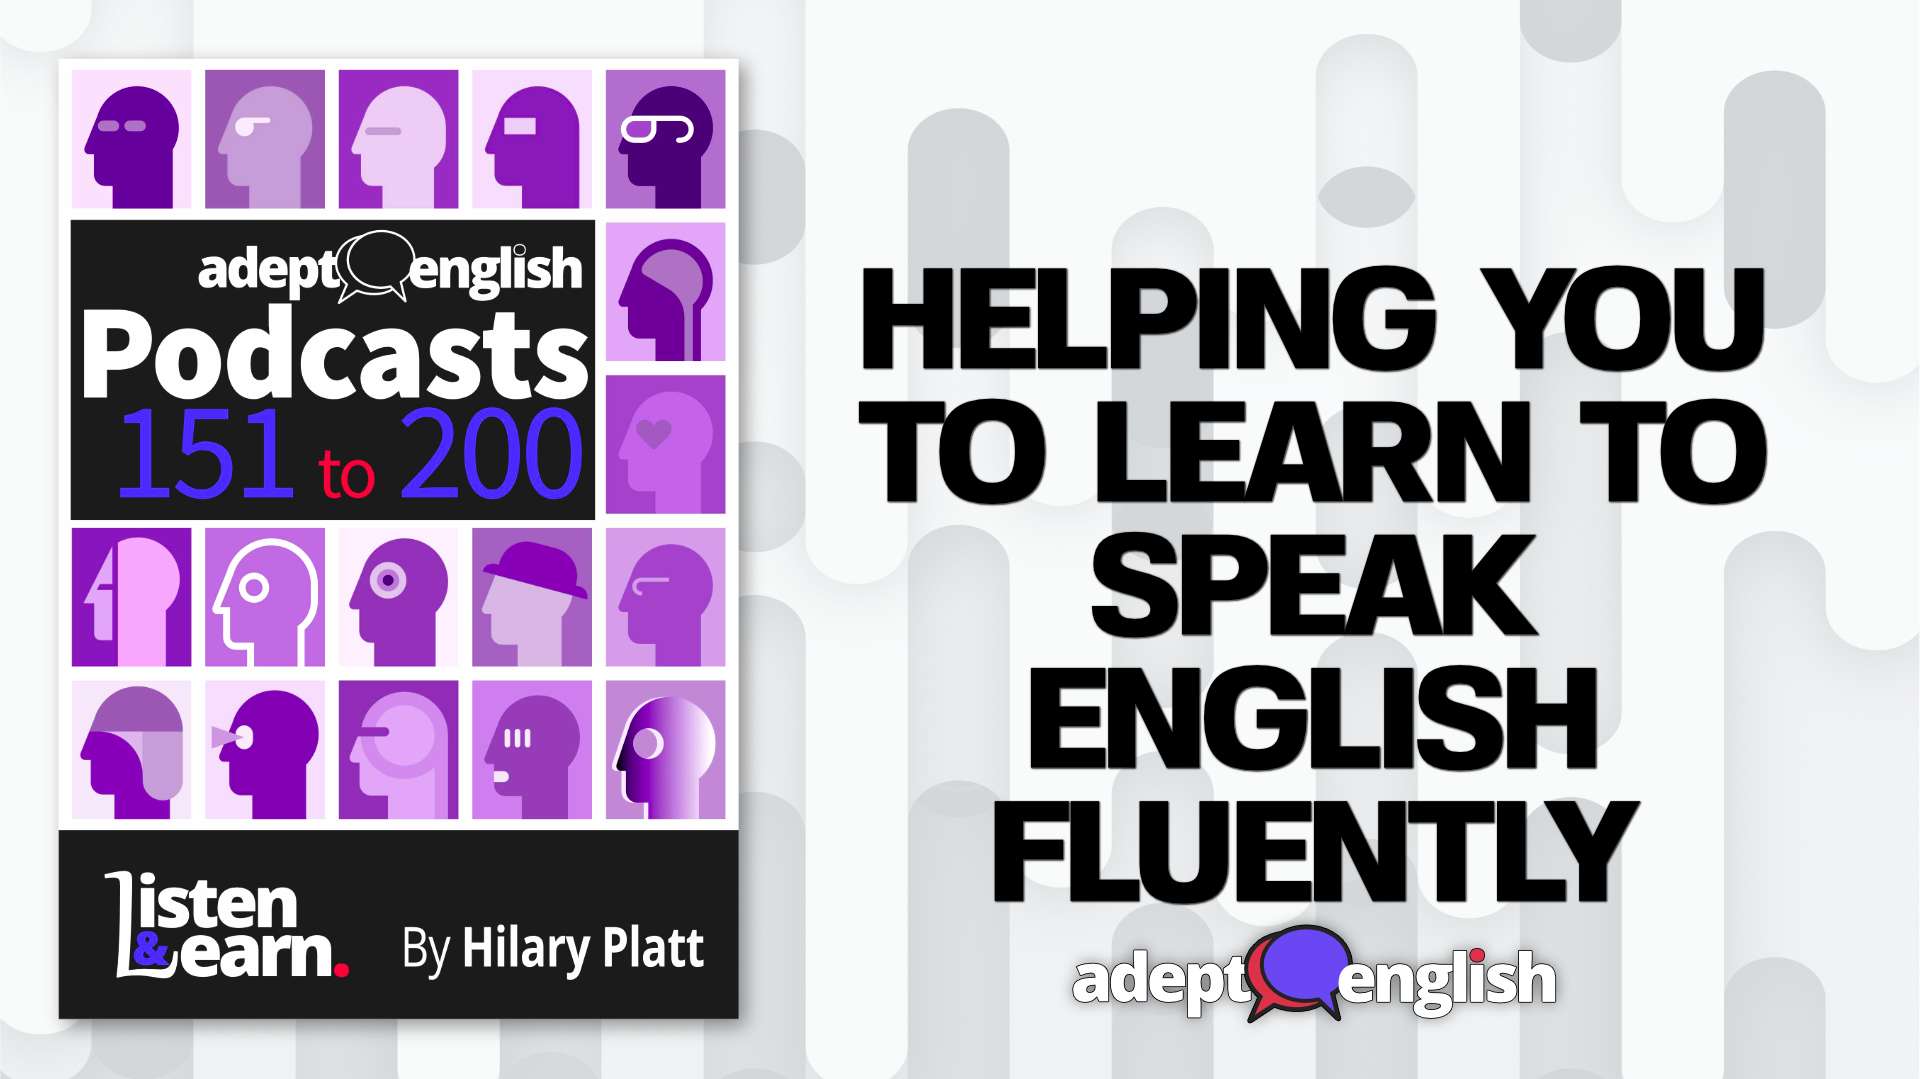 Hours and hours of quality English language listening all in one simple download.